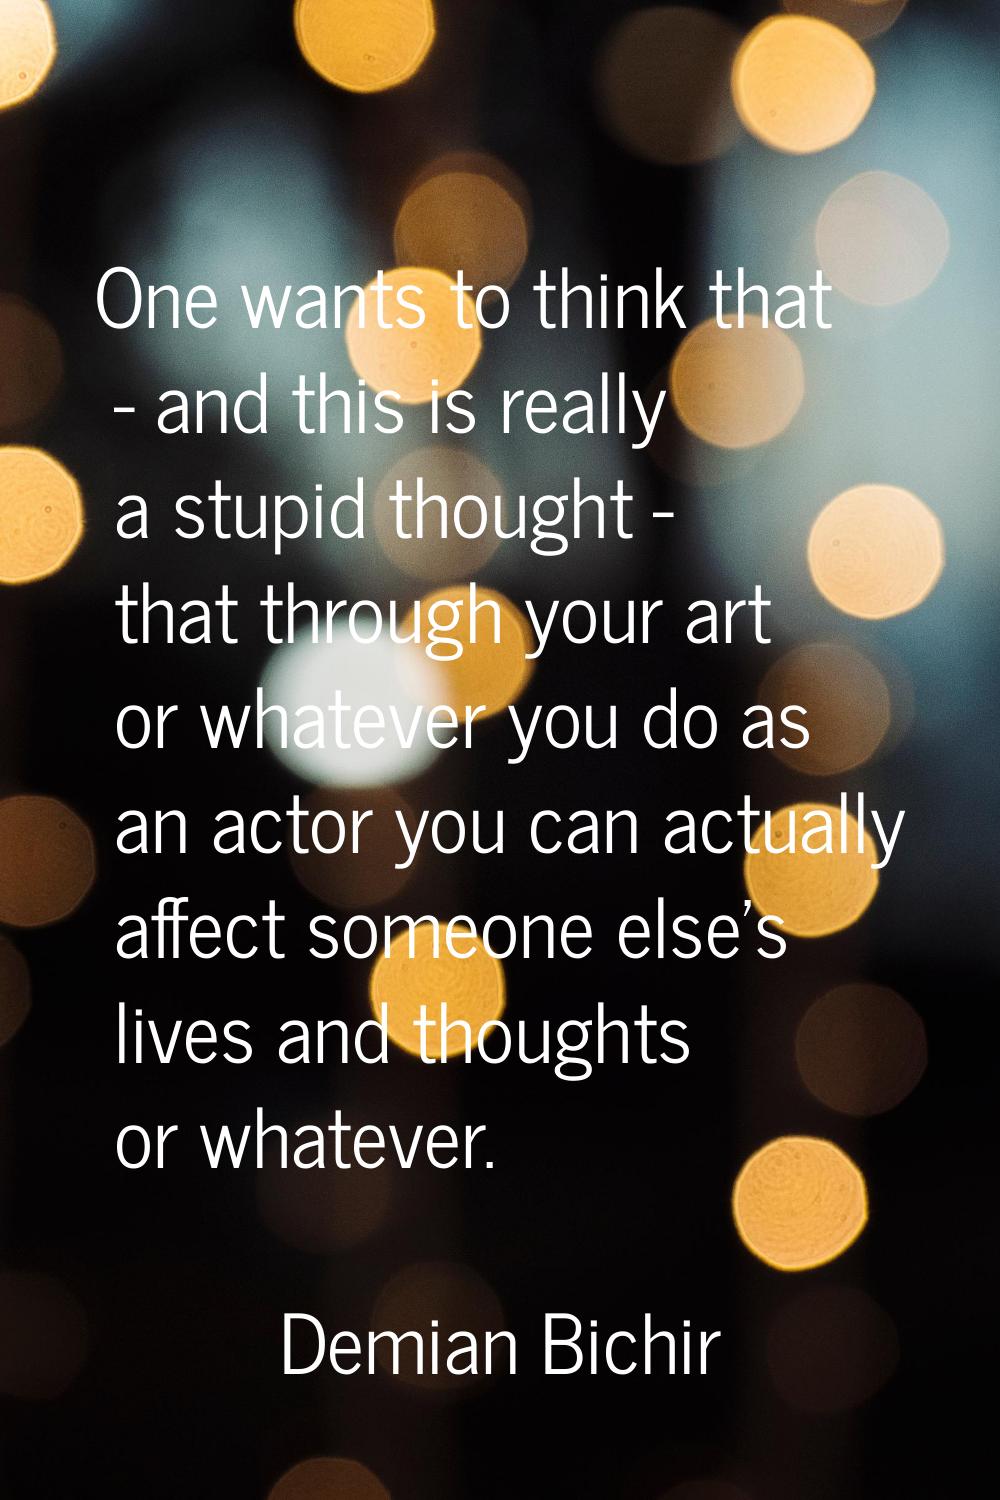 One wants to think that - and this is really a stupid thought - that through your art or whatever y